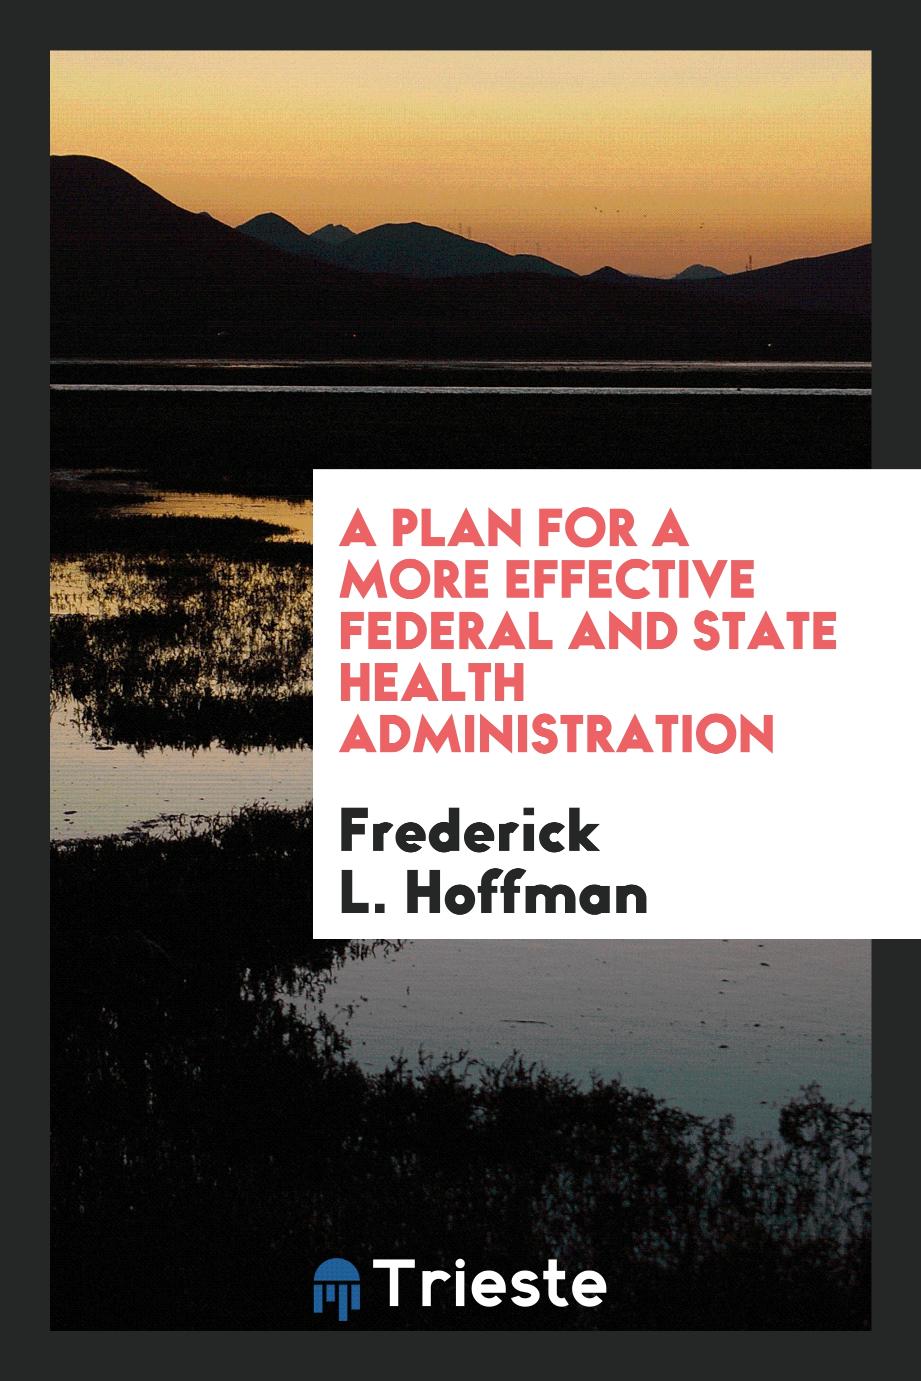 A Plan for a More Effective Federal and State Health Administration